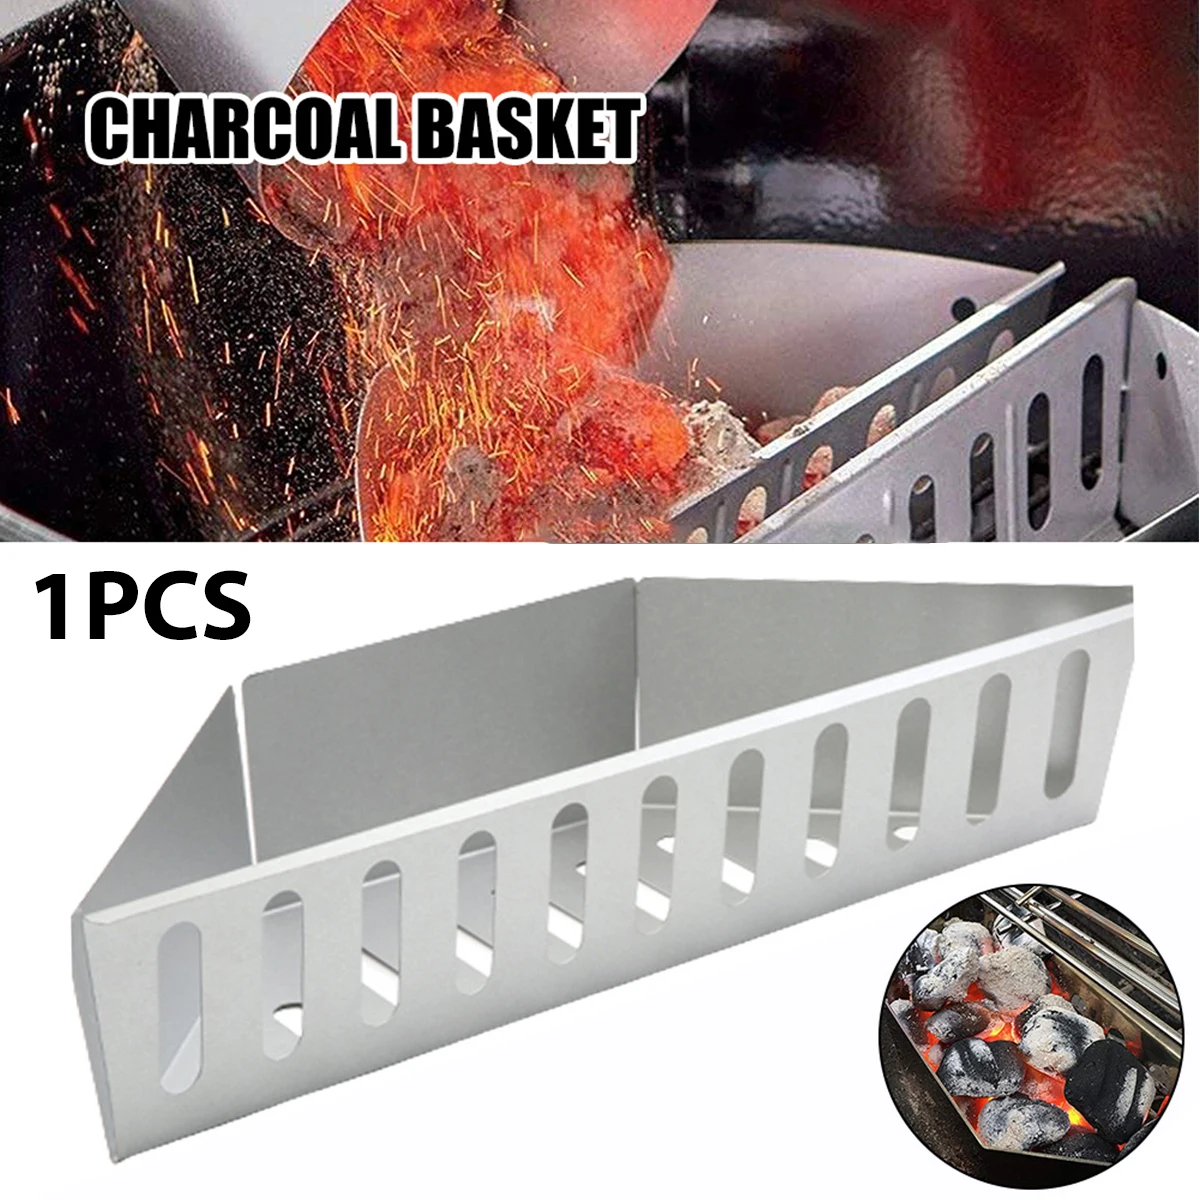 

Charcoal Basket for Kettle Grill 15" Heavy Duty Aluminized Charcoal Holder for Grill High Temperature Resistant Briquette Basket